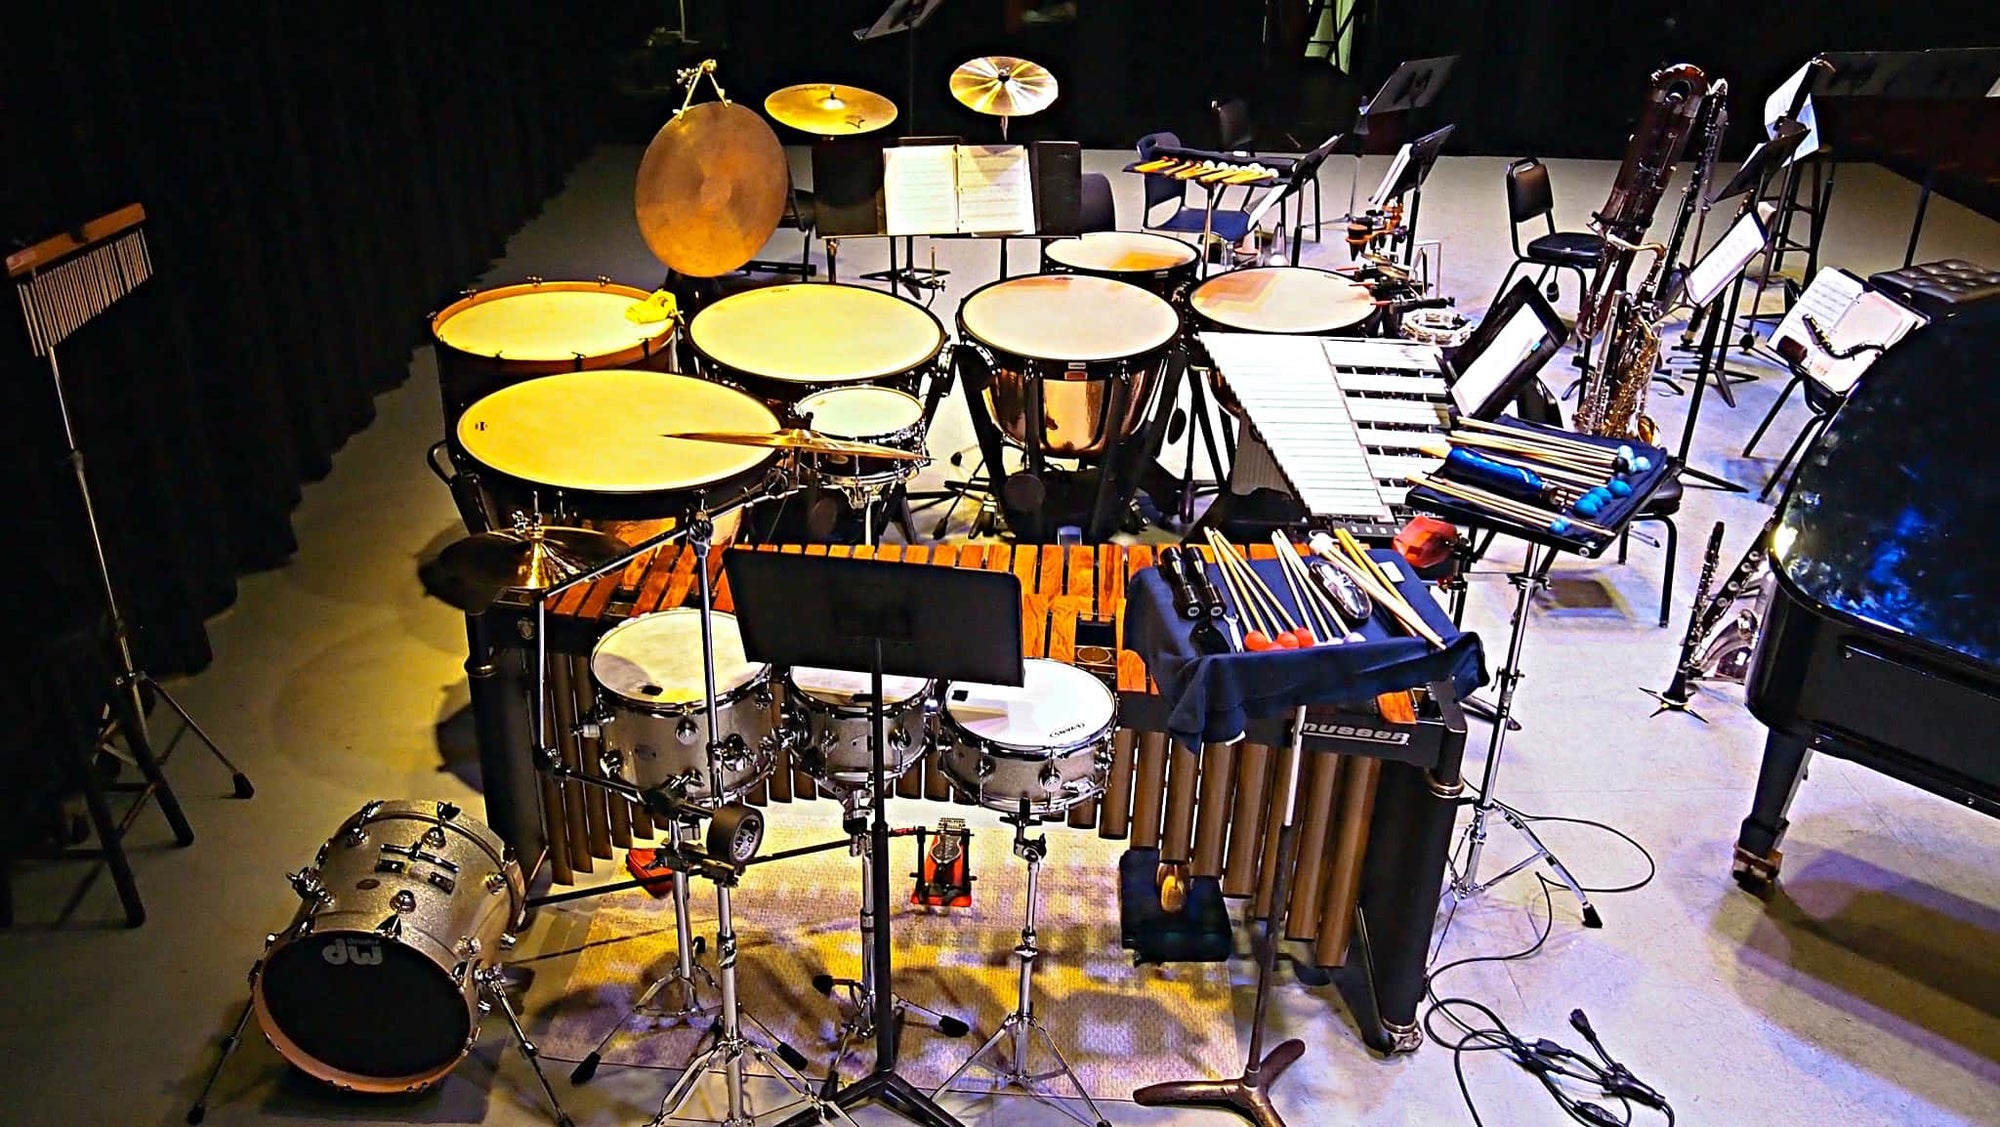 Greg Landes’ setup for the Pit Stop Players’ concert at Symphony Space in New York City.